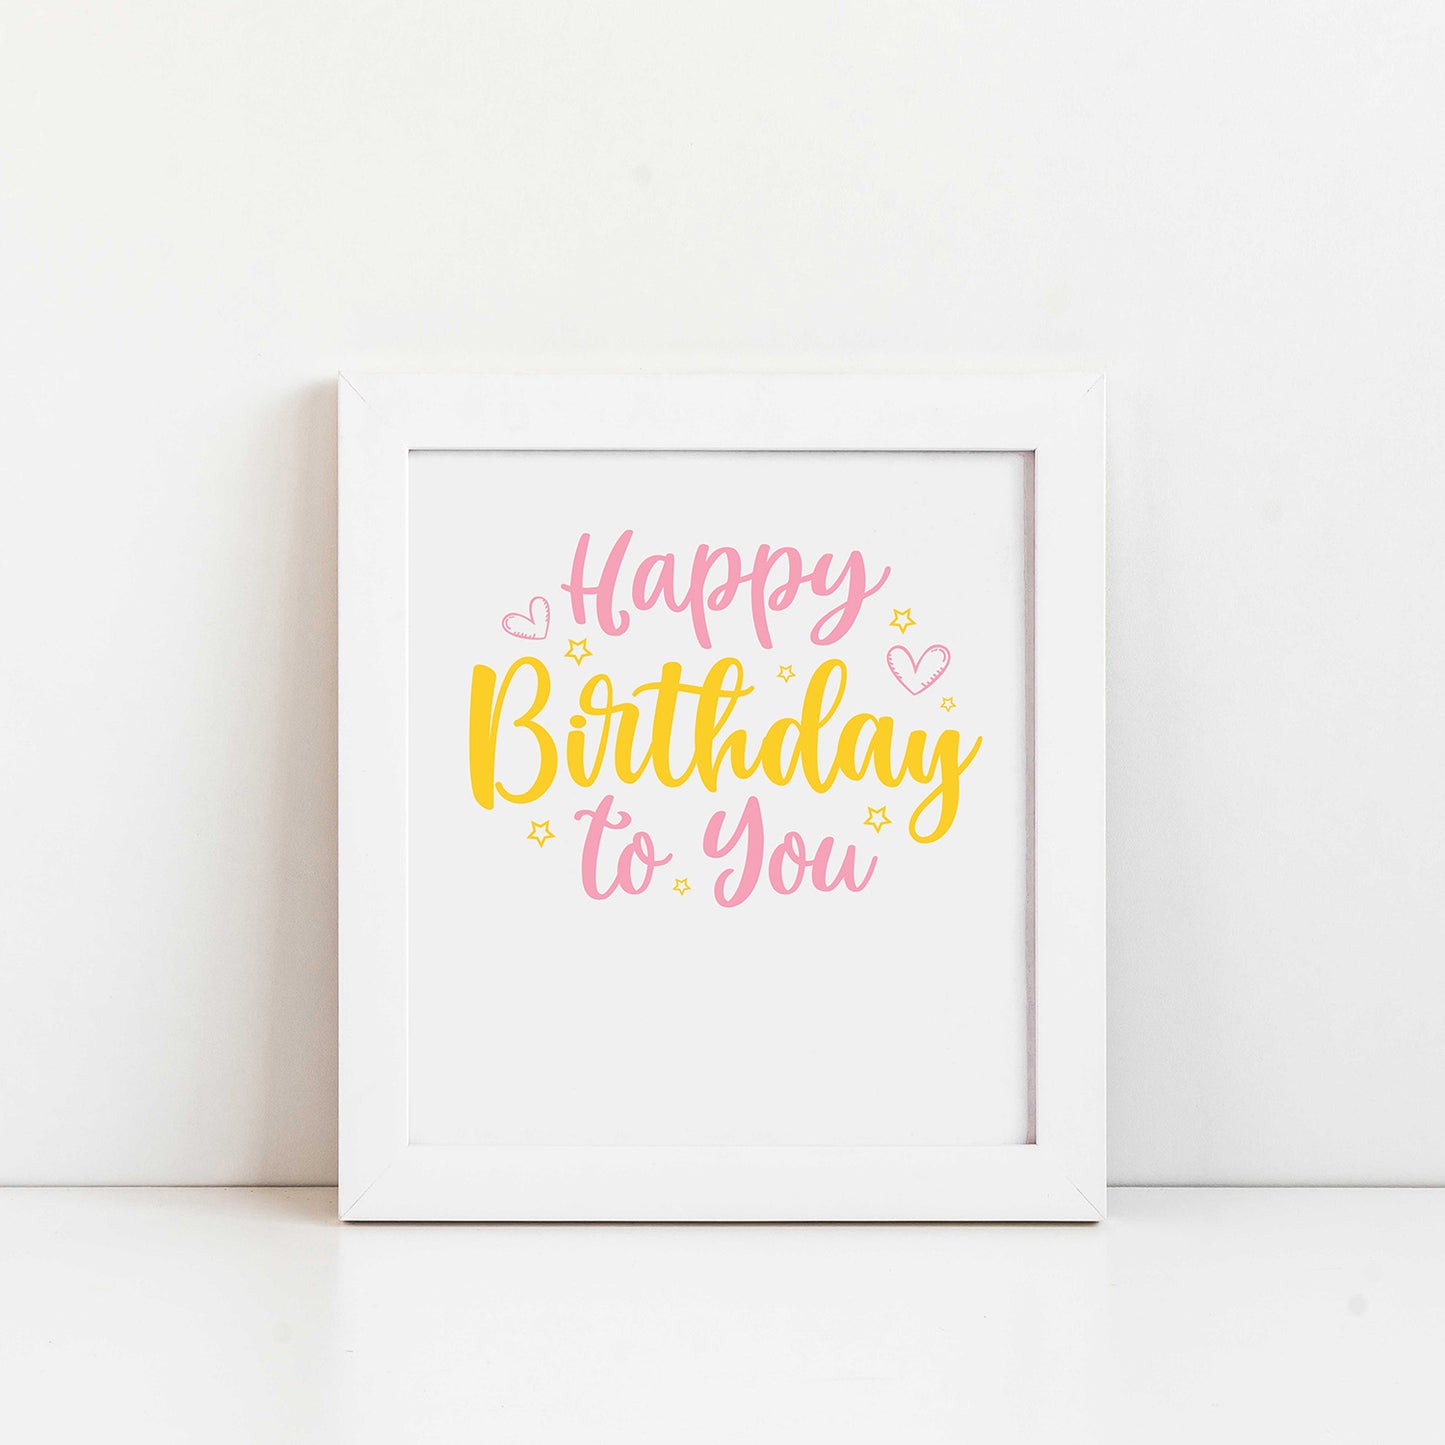 "Happy Birthday To You" Graphic